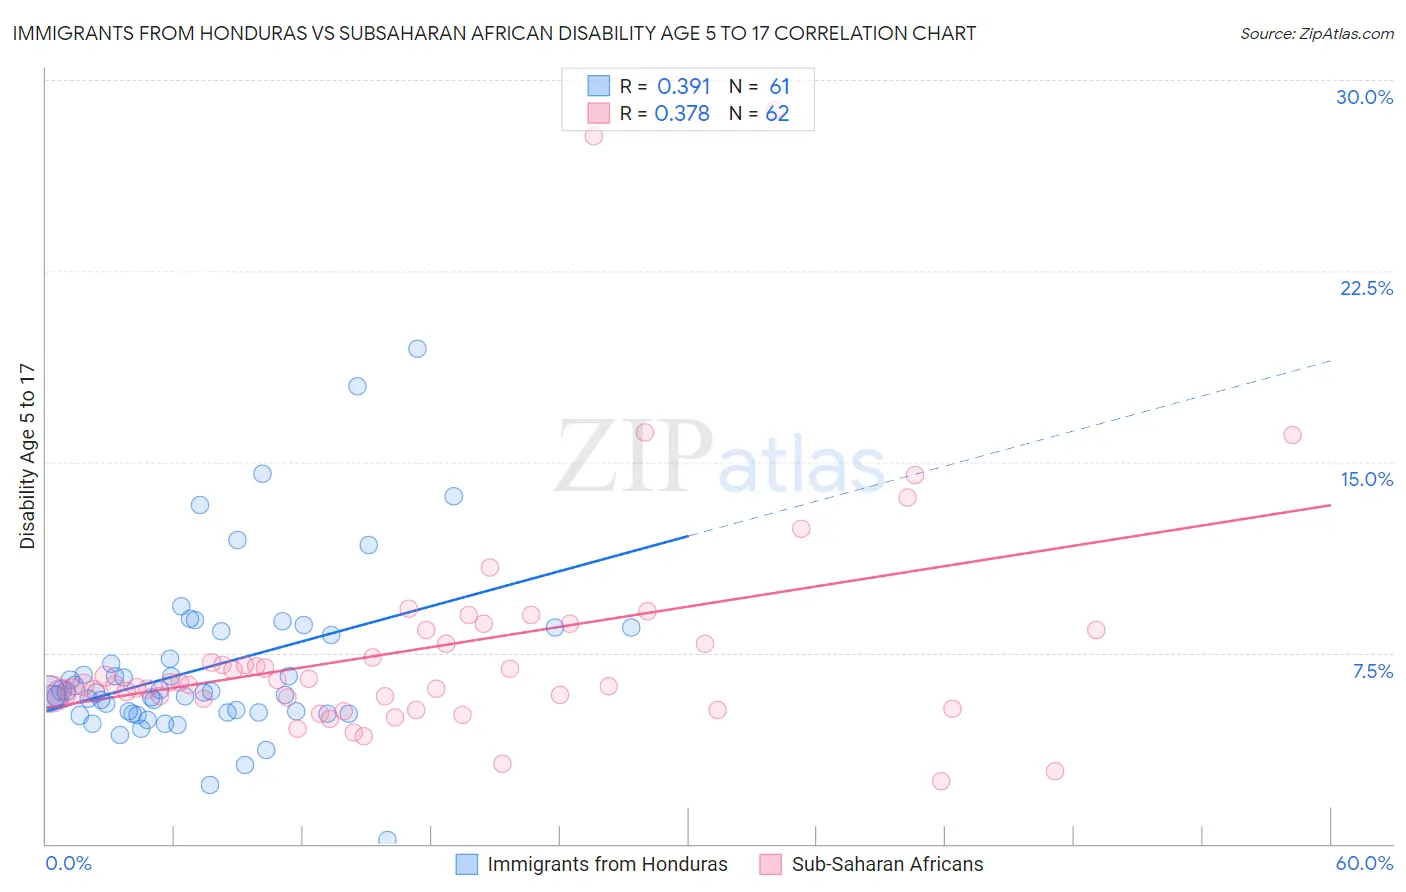 Immigrants from Honduras vs Subsaharan African Disability Age 5 to 17